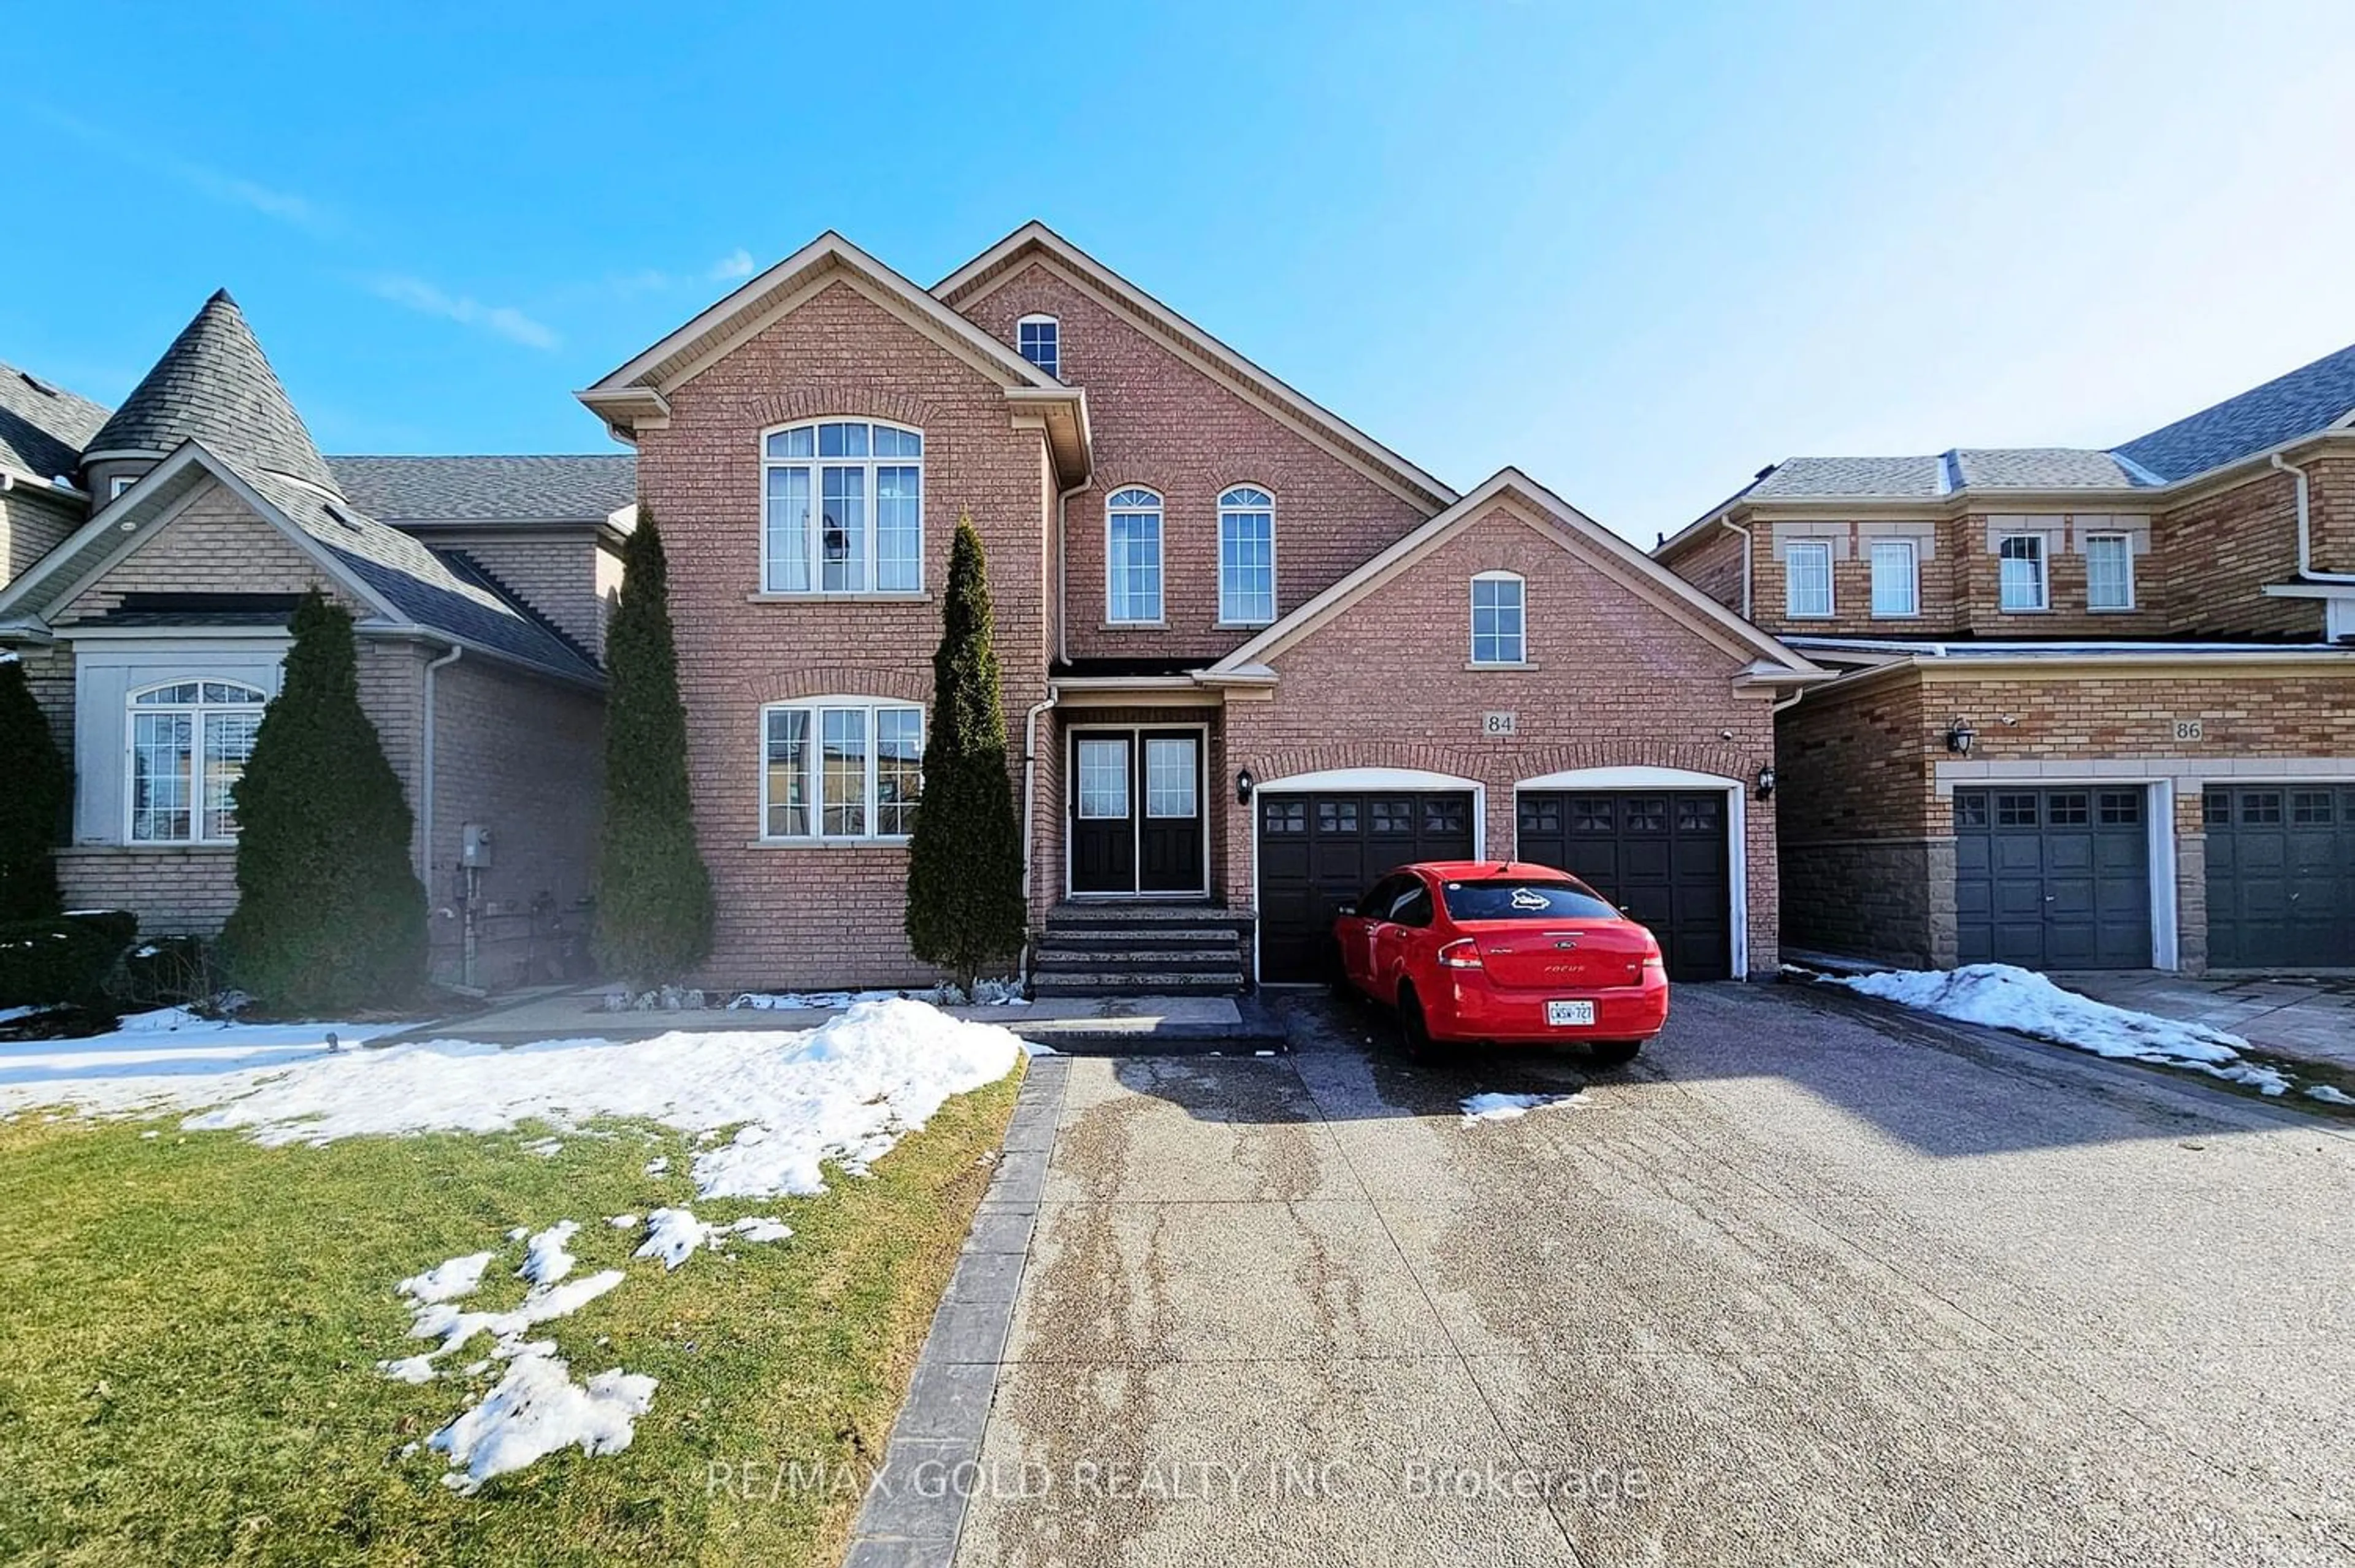 Home with brick exterior material for 84 Edenbrook Hill Dr, Brampton Ontario L7A 2N7